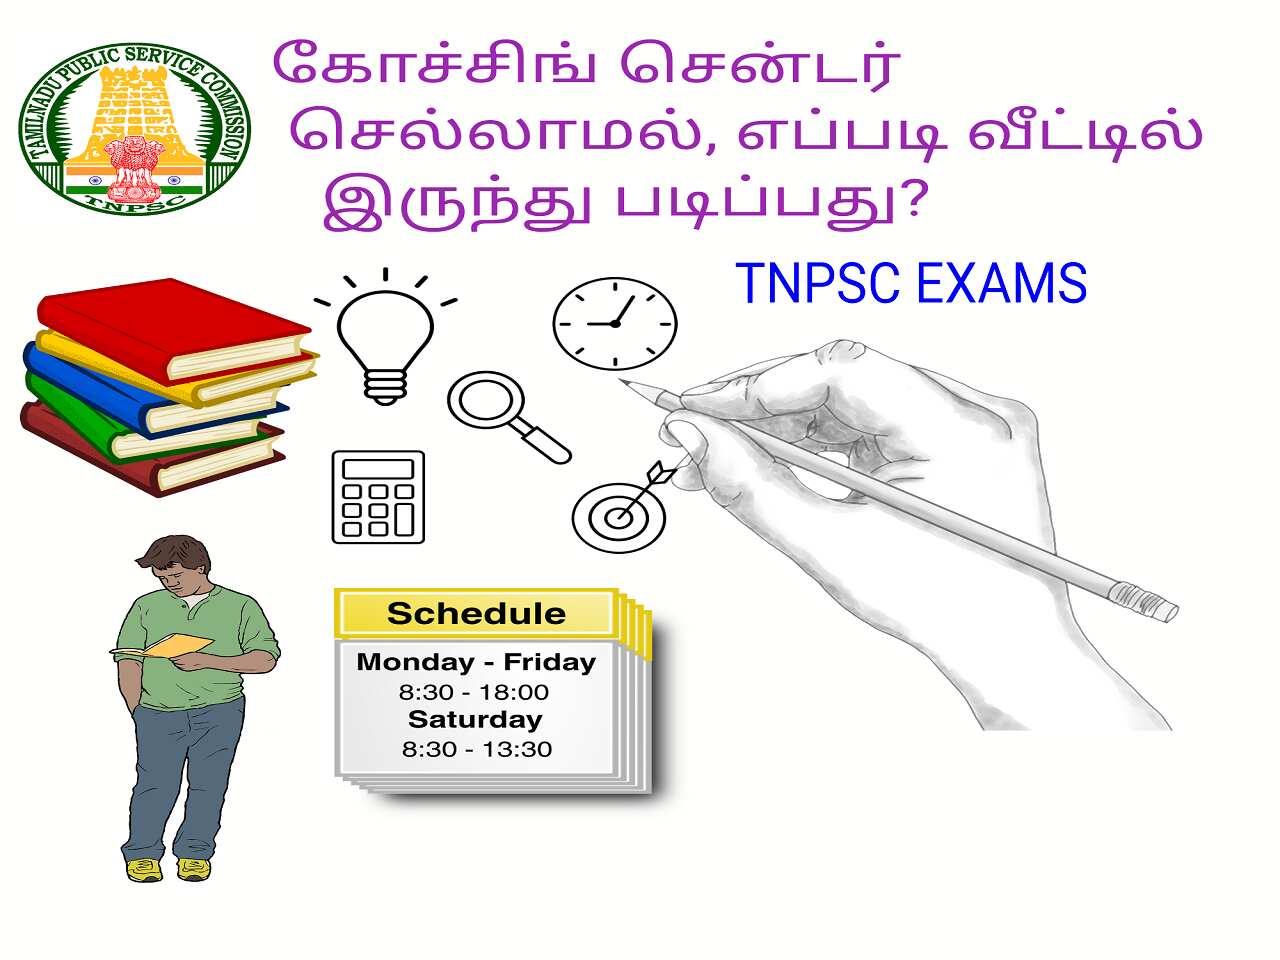 How to Clear TNPSC Group 2 in first attempt - How to Prepare TNPSC Exam